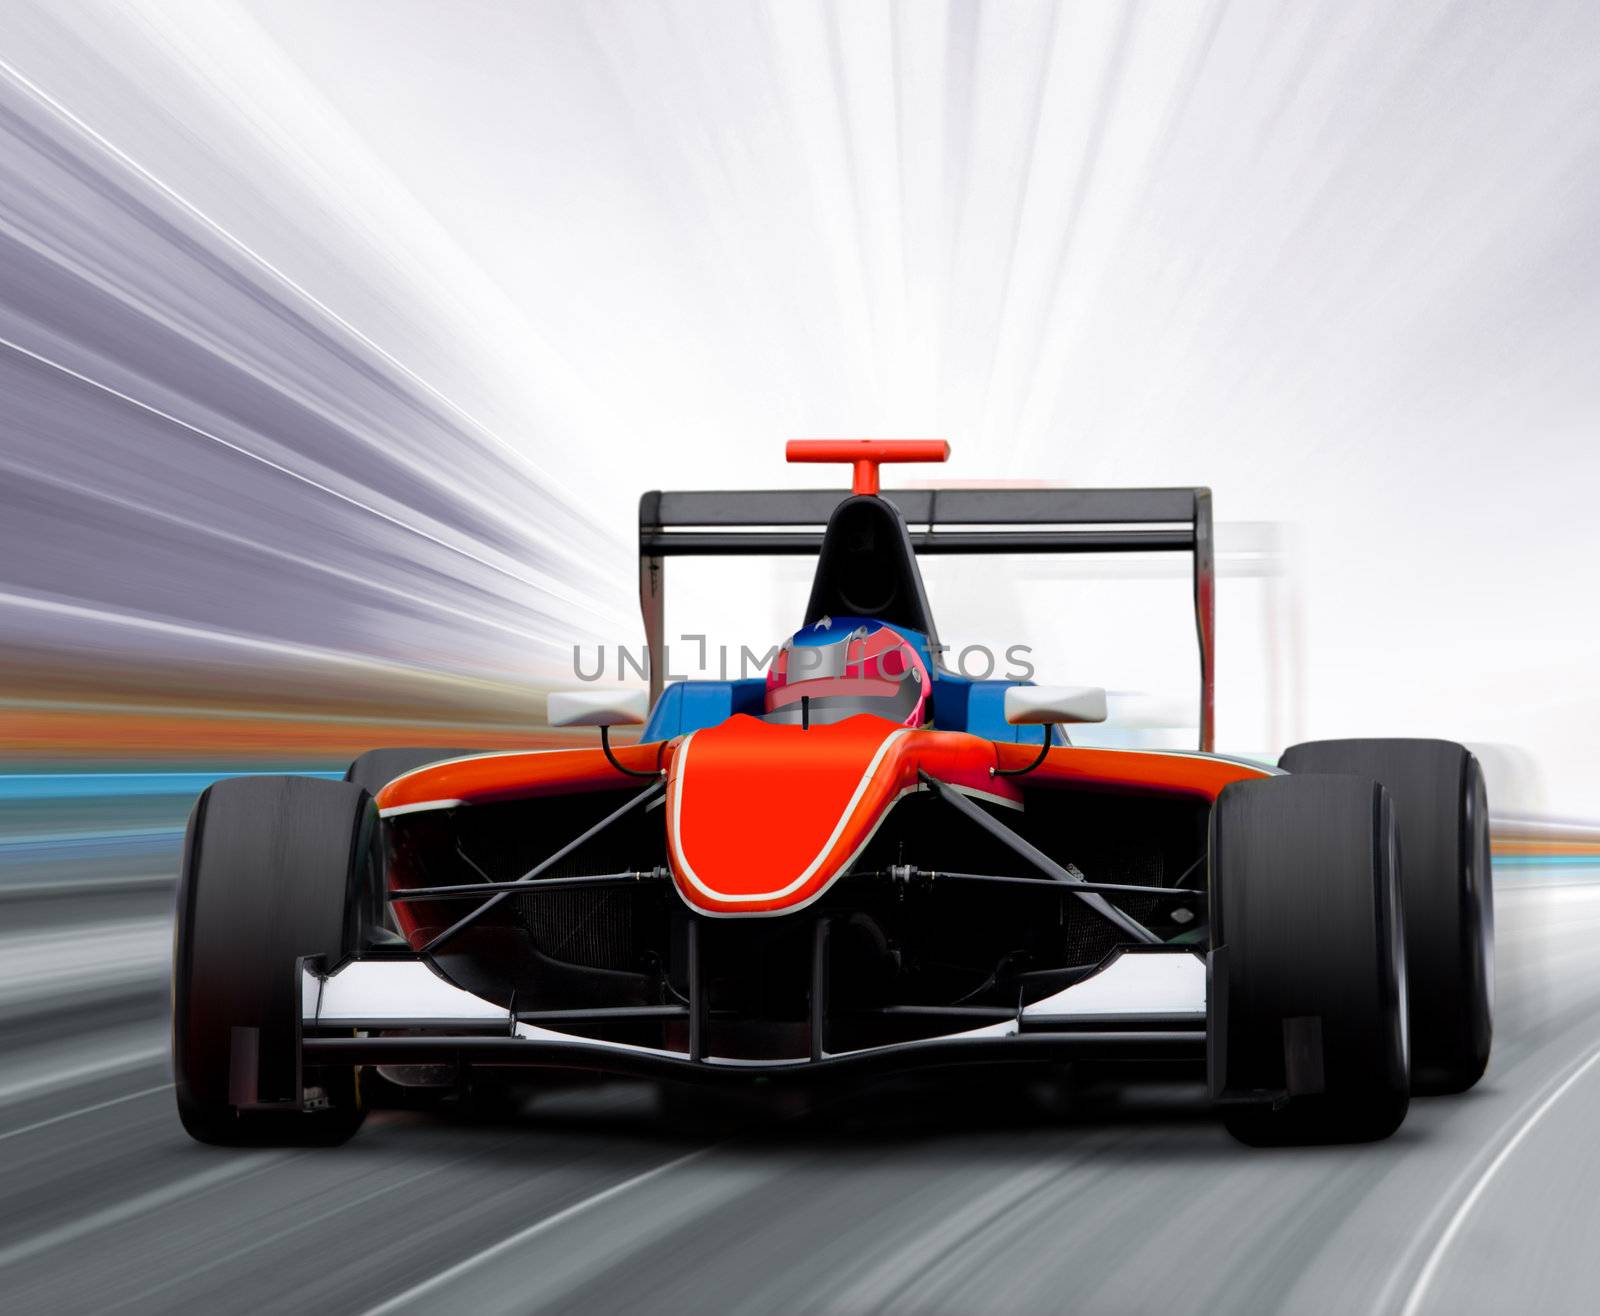 formula one race car on speed track - motion blur